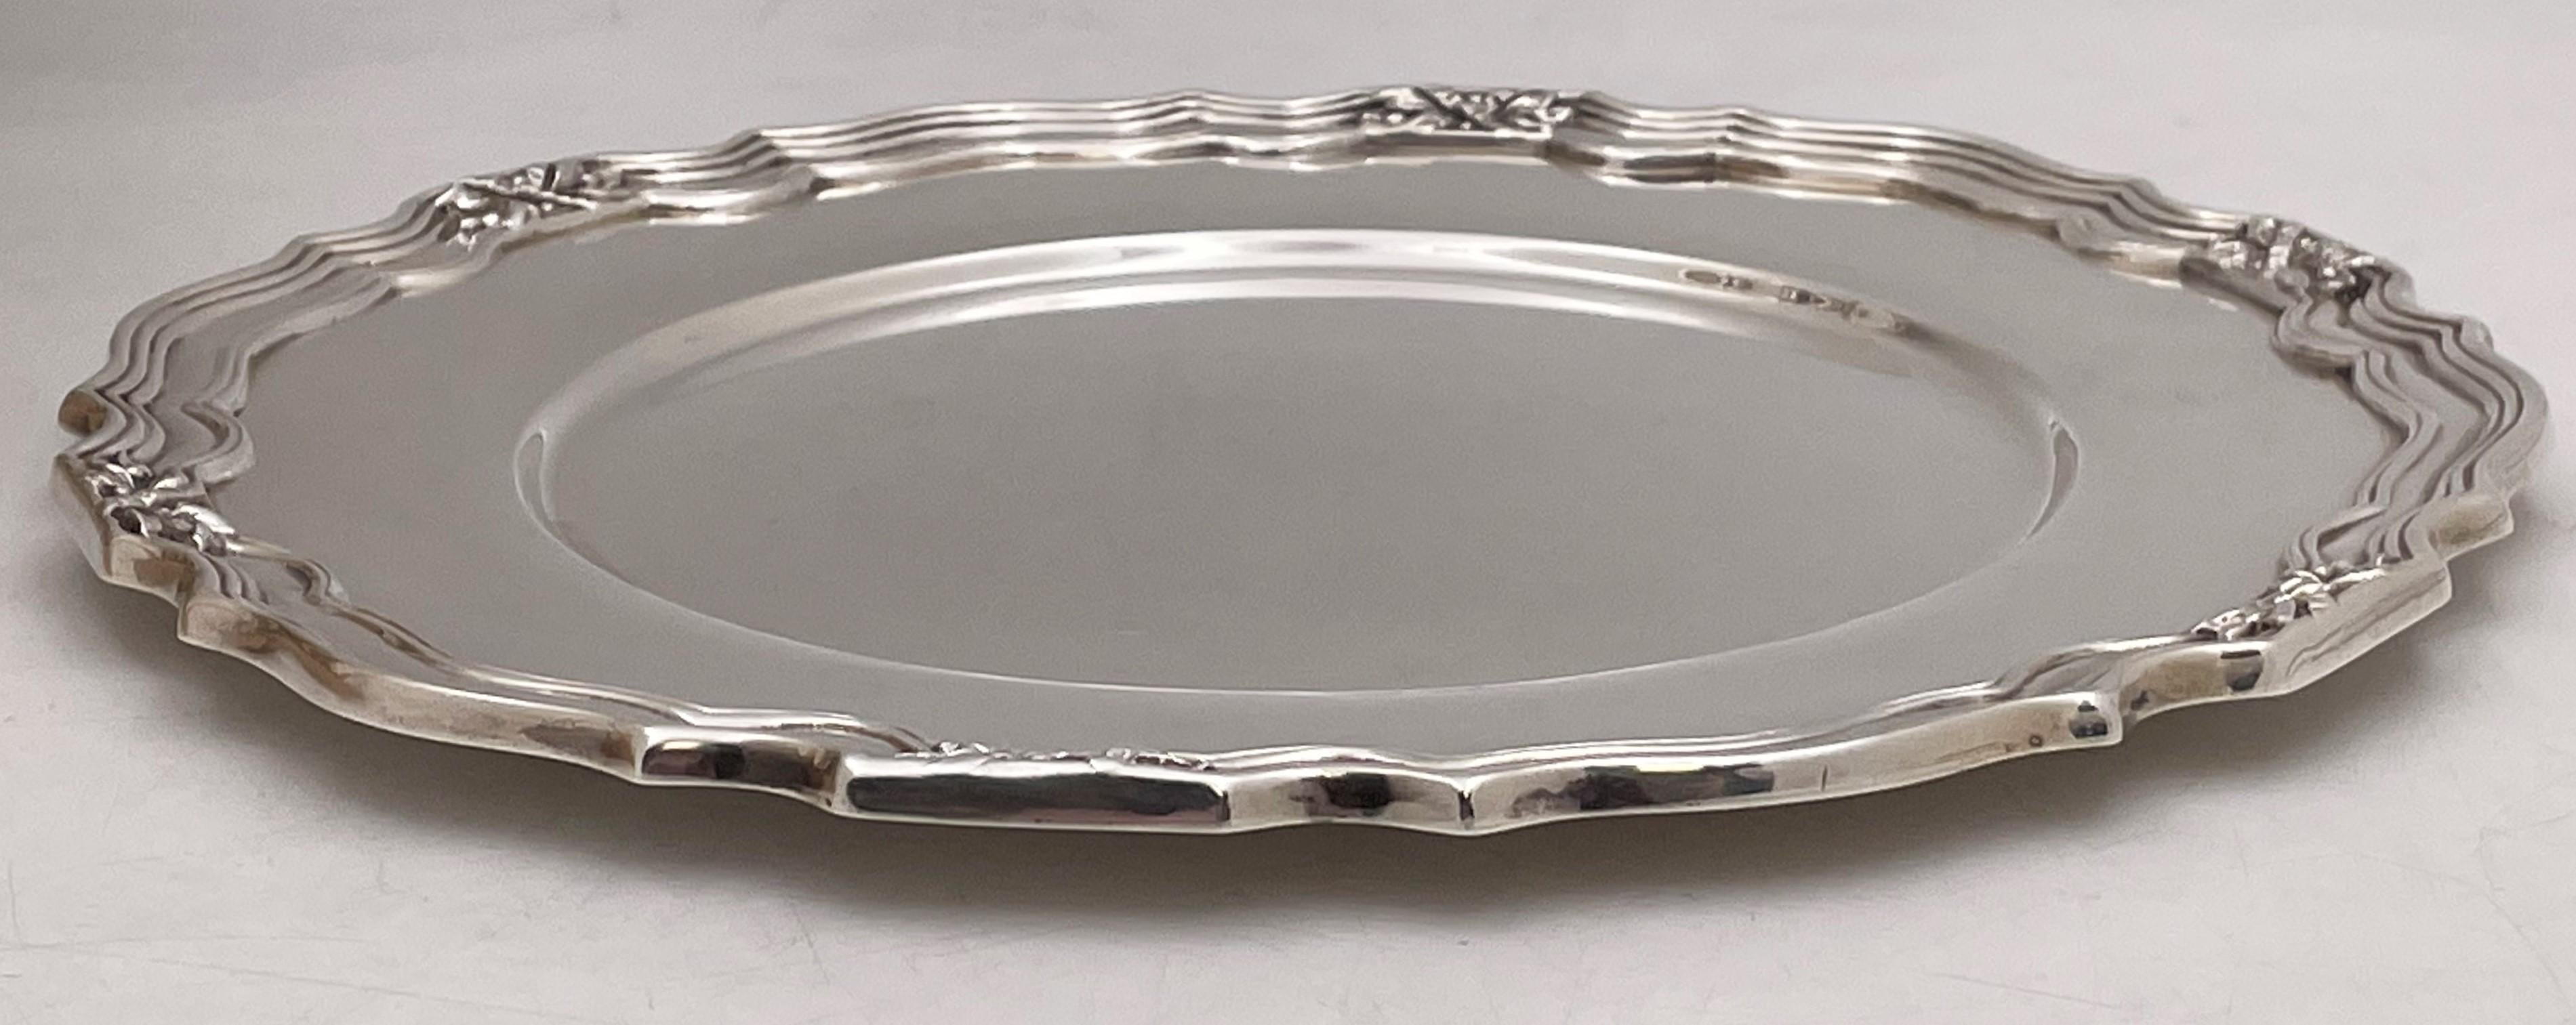 Dominick & Haff 1907 Set of 12 Sterling Silver Dinner Plates/ Chargers In Good Condition For Sale In New York, NY